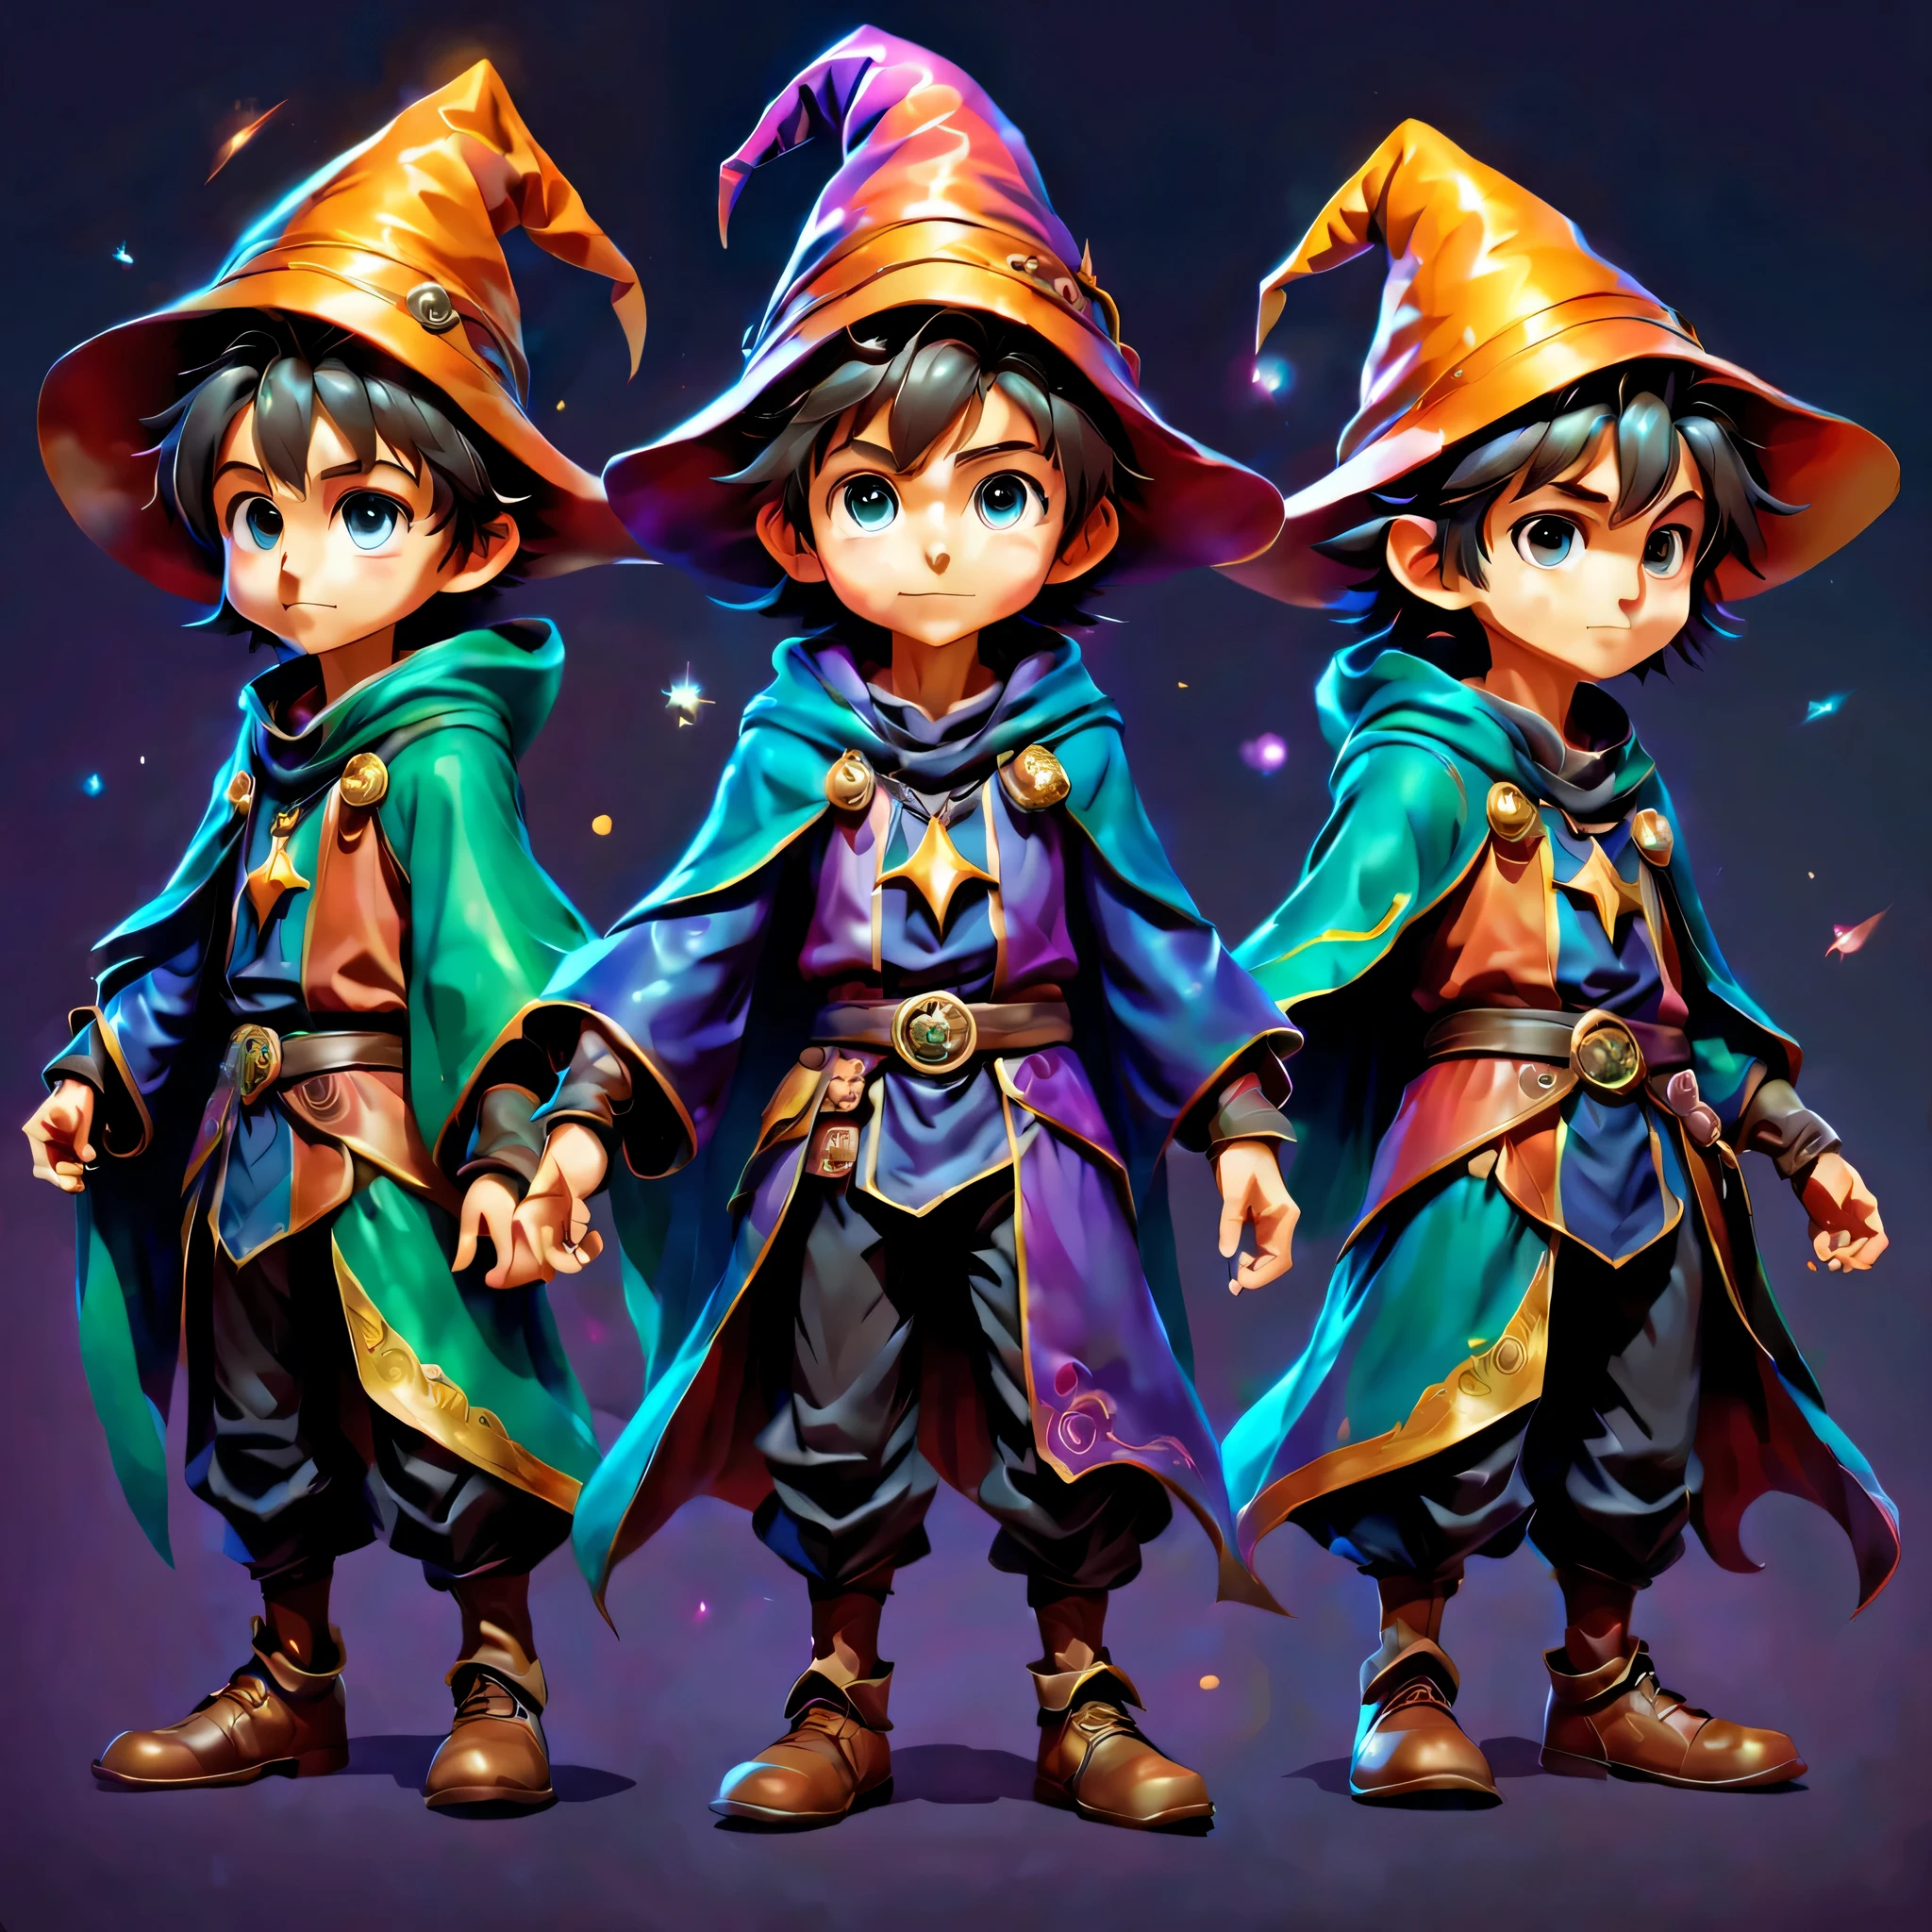 Create an original character design sheet,anime main character,boy,wizard,((3 views,whole body, background,multiple views,High resolution)),be familiar with,multiple views,Active,action pose,dynamic,nice,cute,masterpiece,highest quality,In detail,gracefully,rich colors,Cast a colorful spell,colorful,Plain background